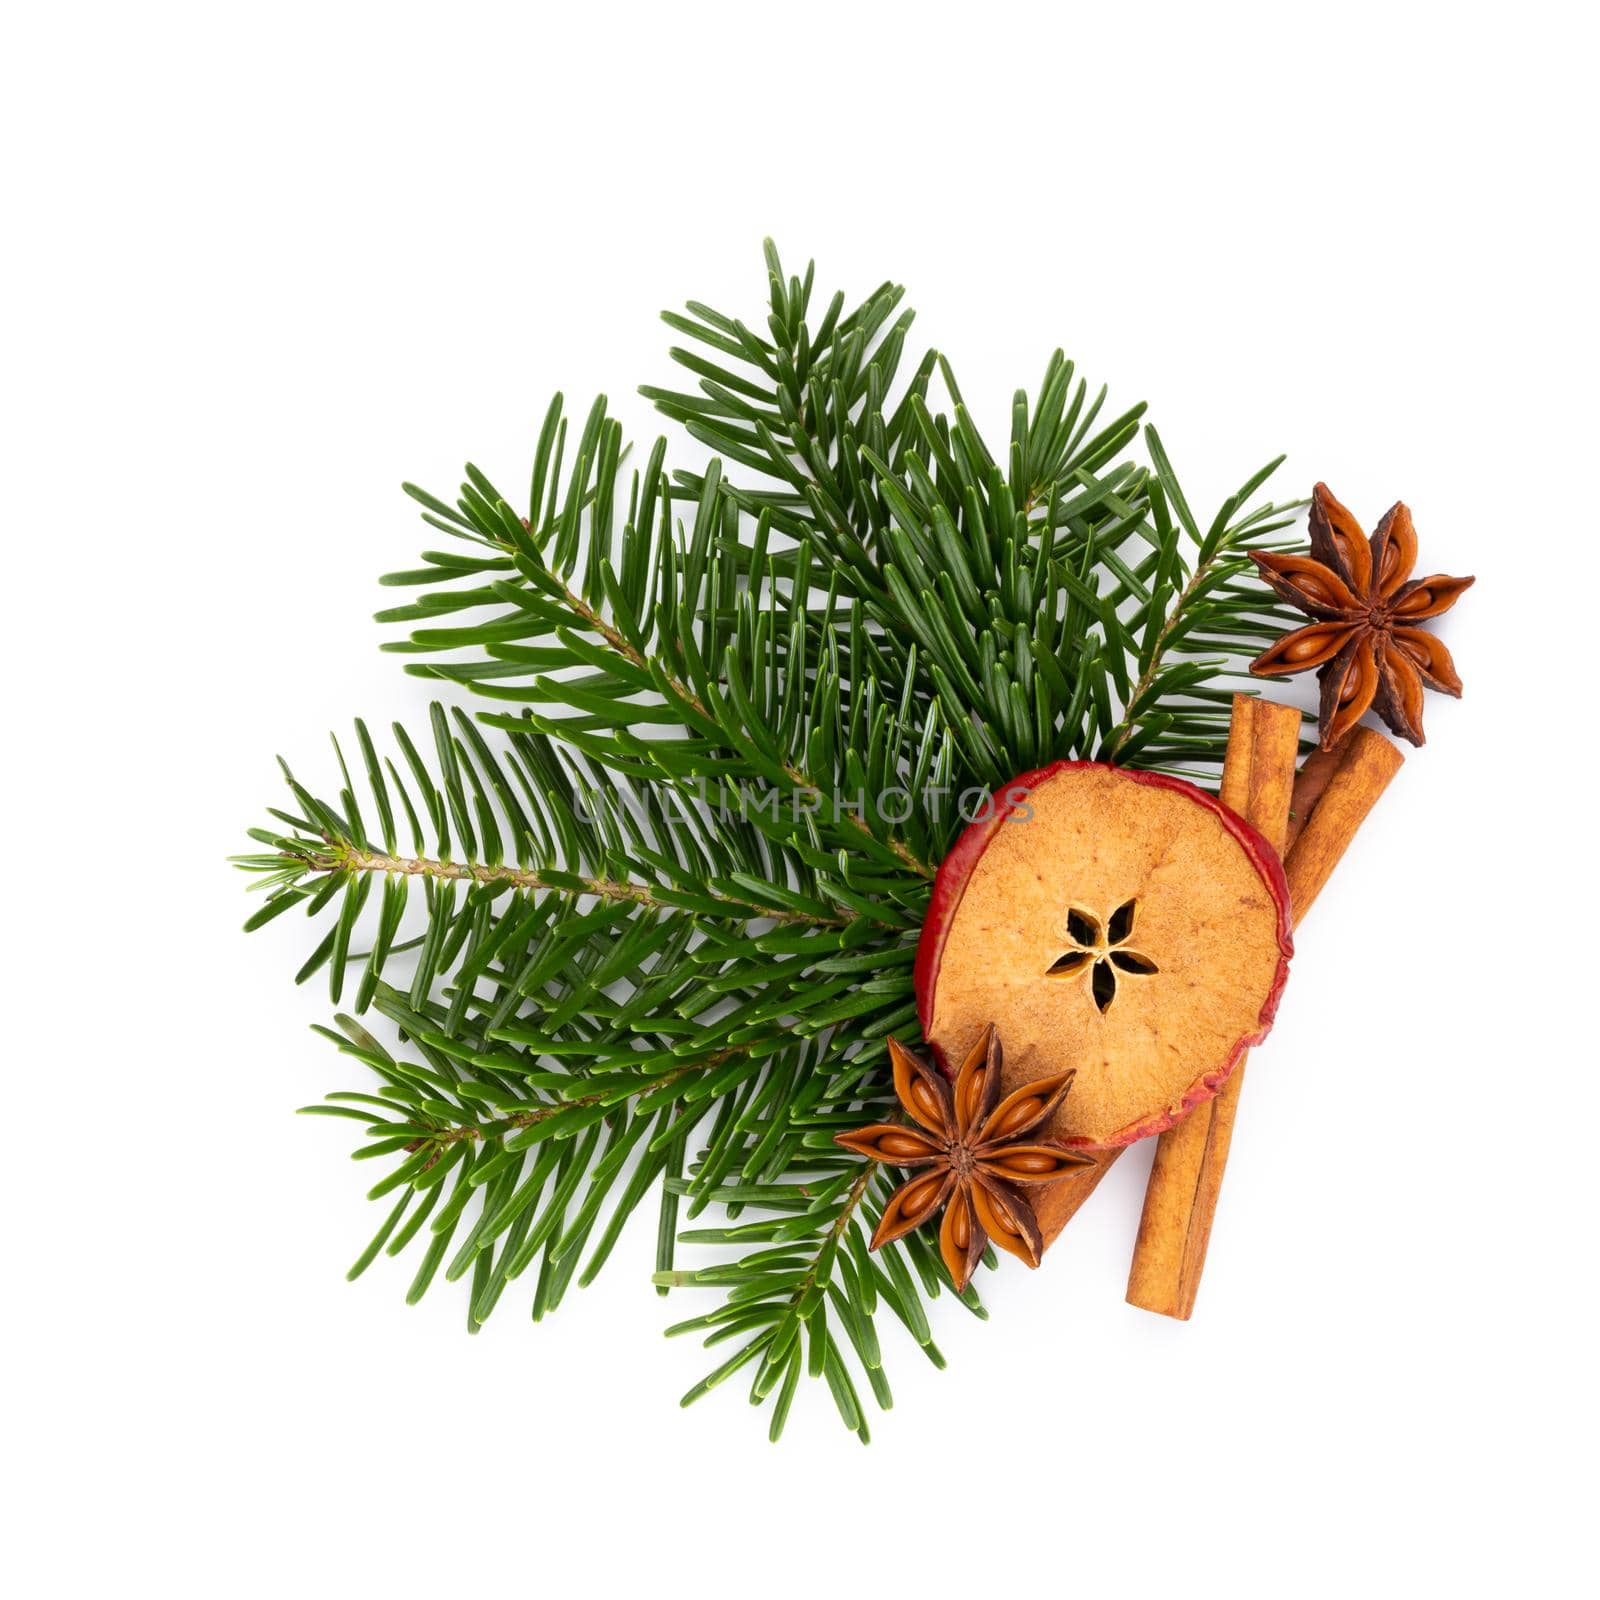 Pine cones and fir tree branch on a white background.